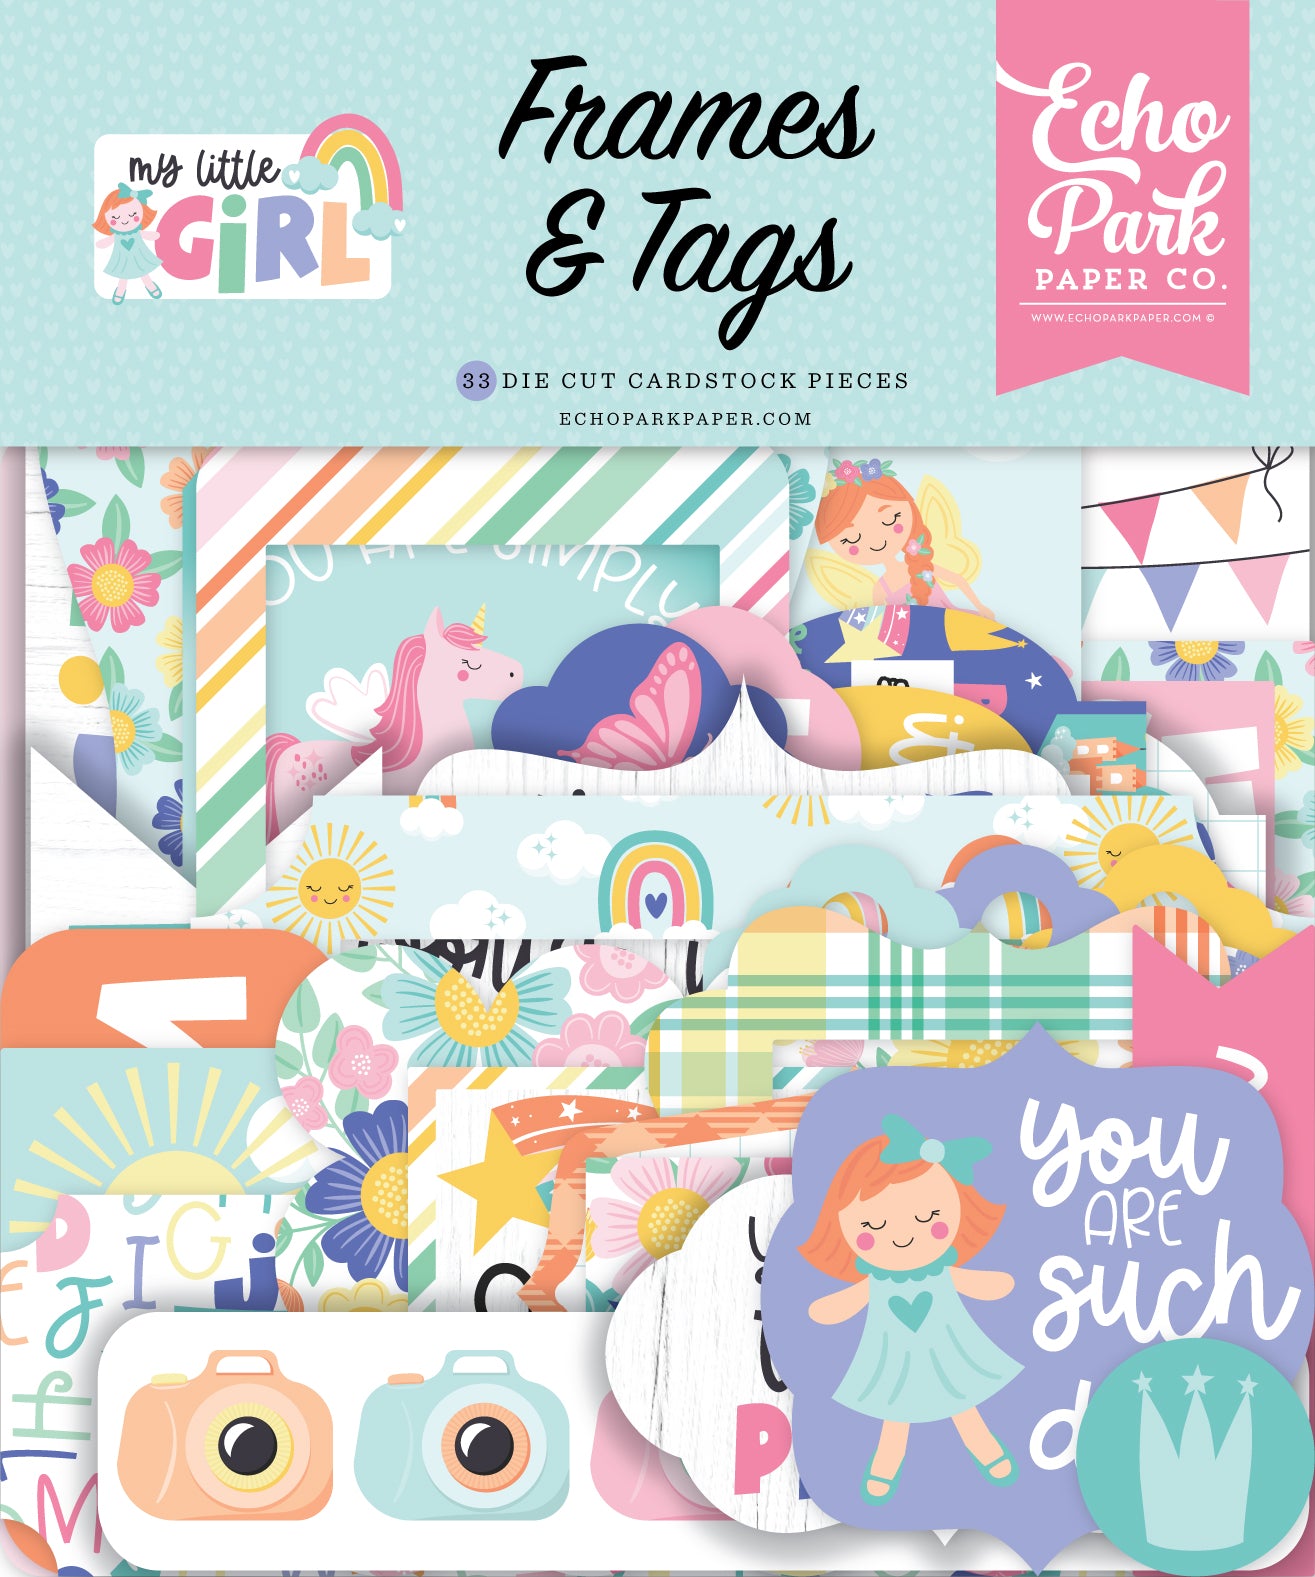 My Little Girl Collection Scrapbook Frames & Tags by Echo Park Paper